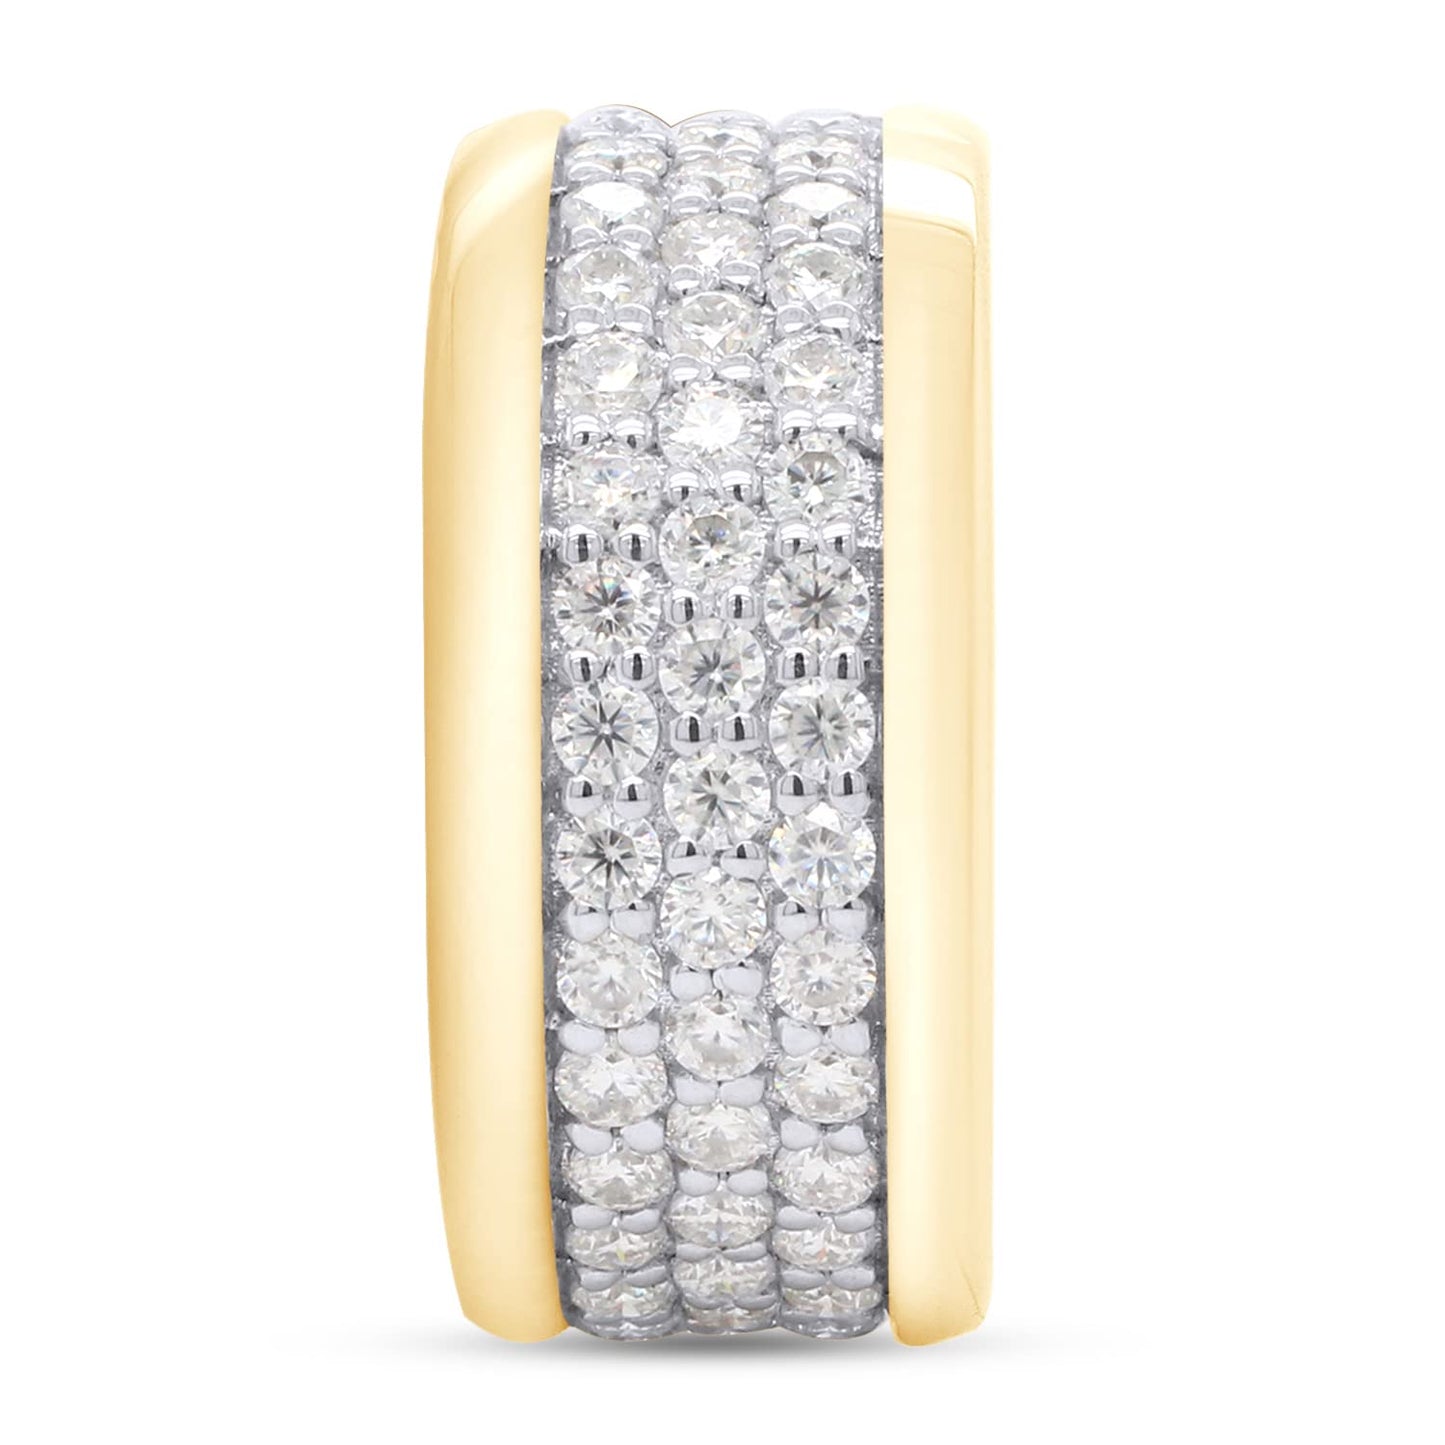 1.75 Carat Round Cut Lab Created Moissanite Diamond 3-Row Full Eternity Stackable Wedding Band Ring In 925 Sterling Silver